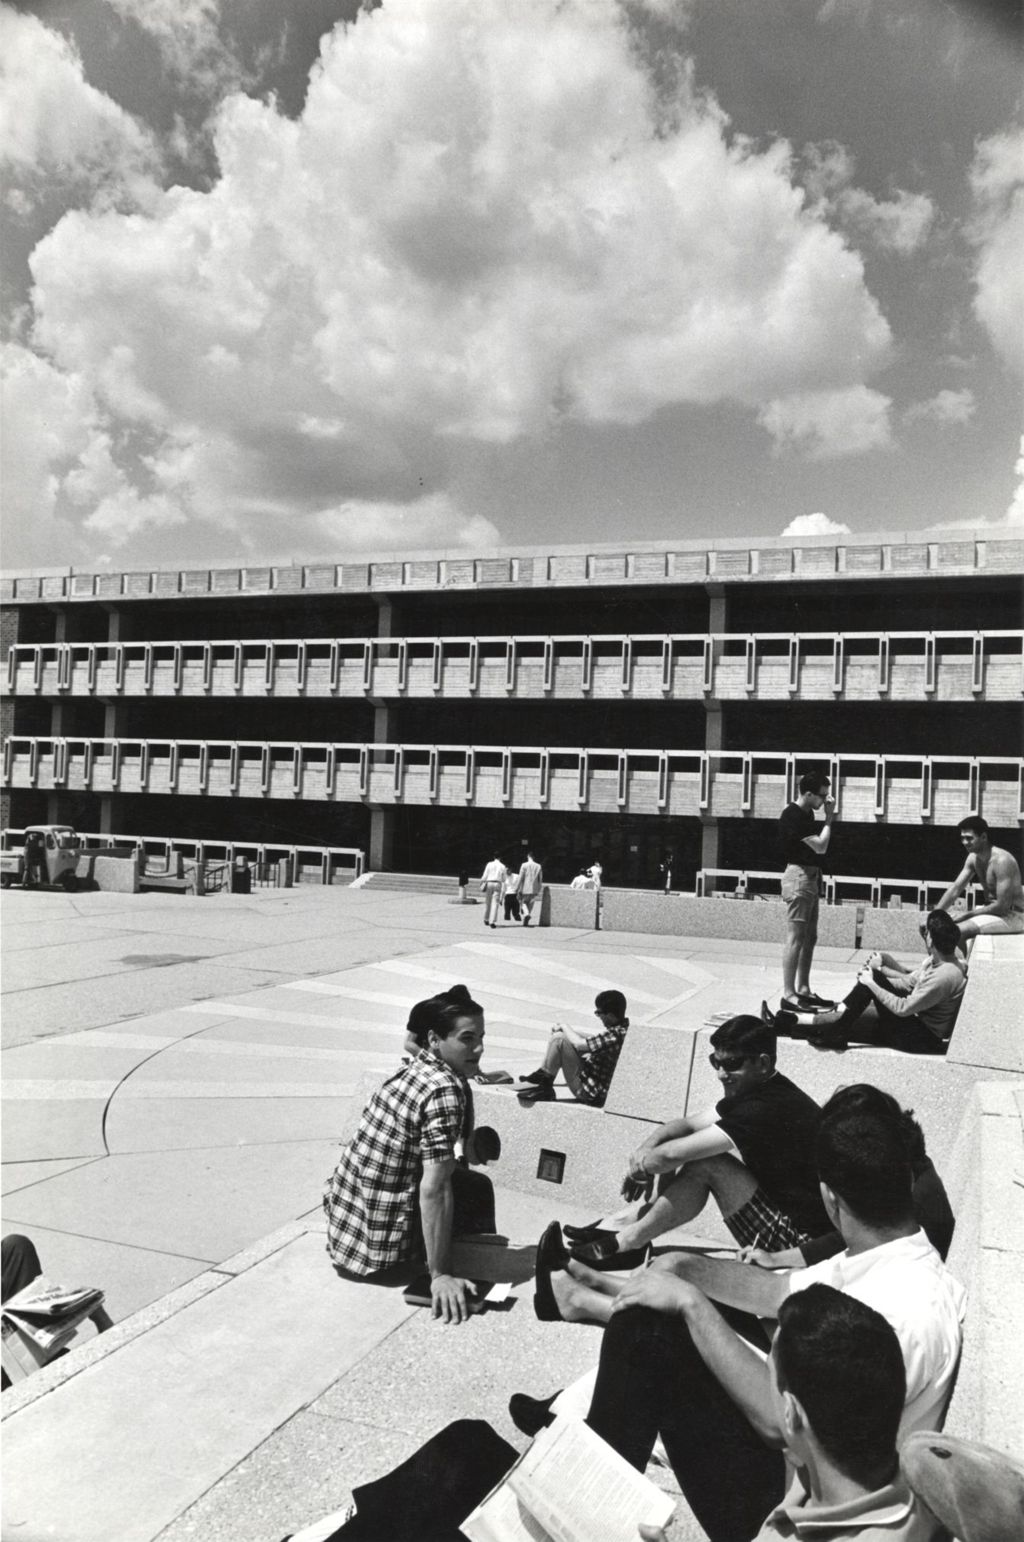 Students sitting on the Great Court. Richard J. Daley Library in the background